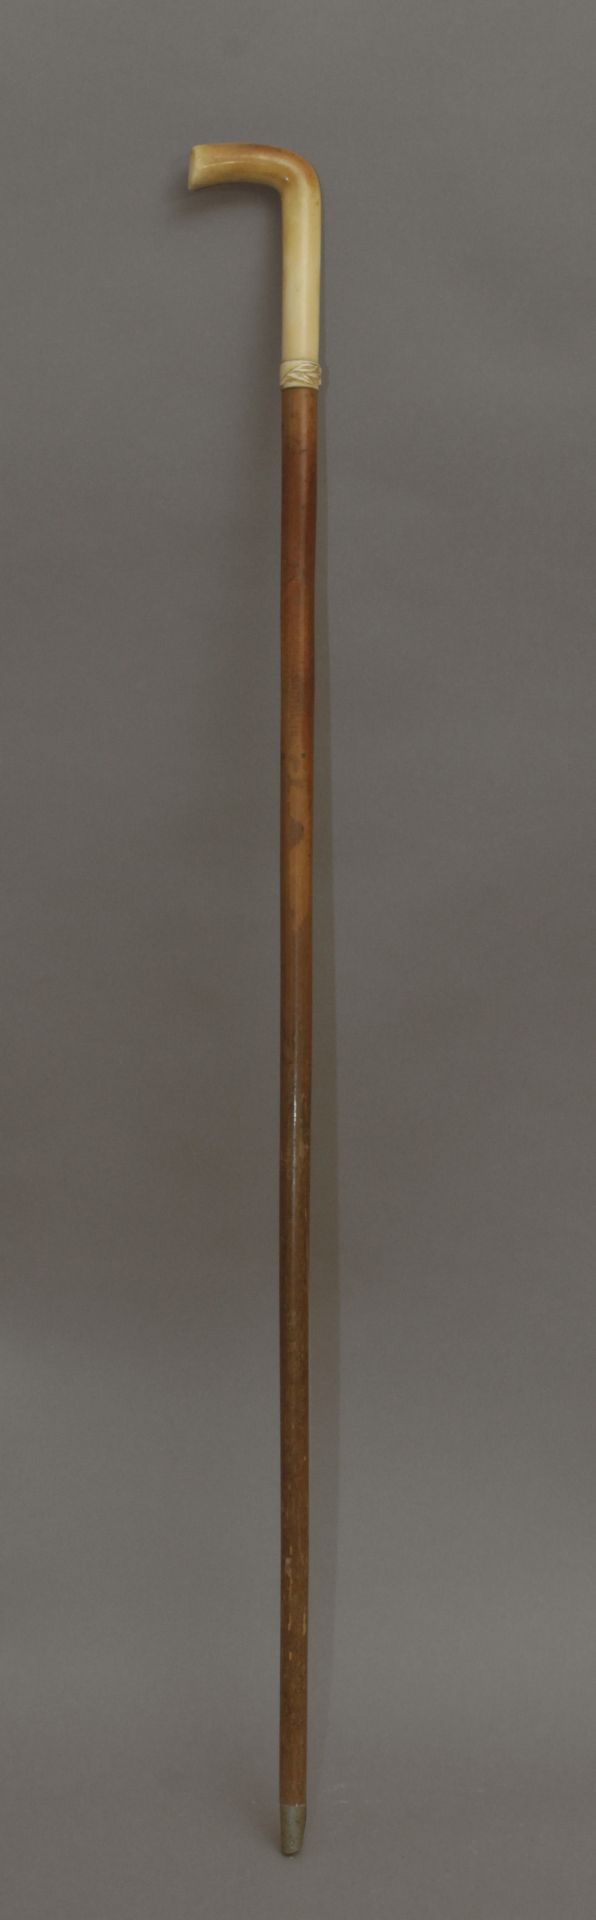 A first half of 20th century walking stick - Image 3 of 7